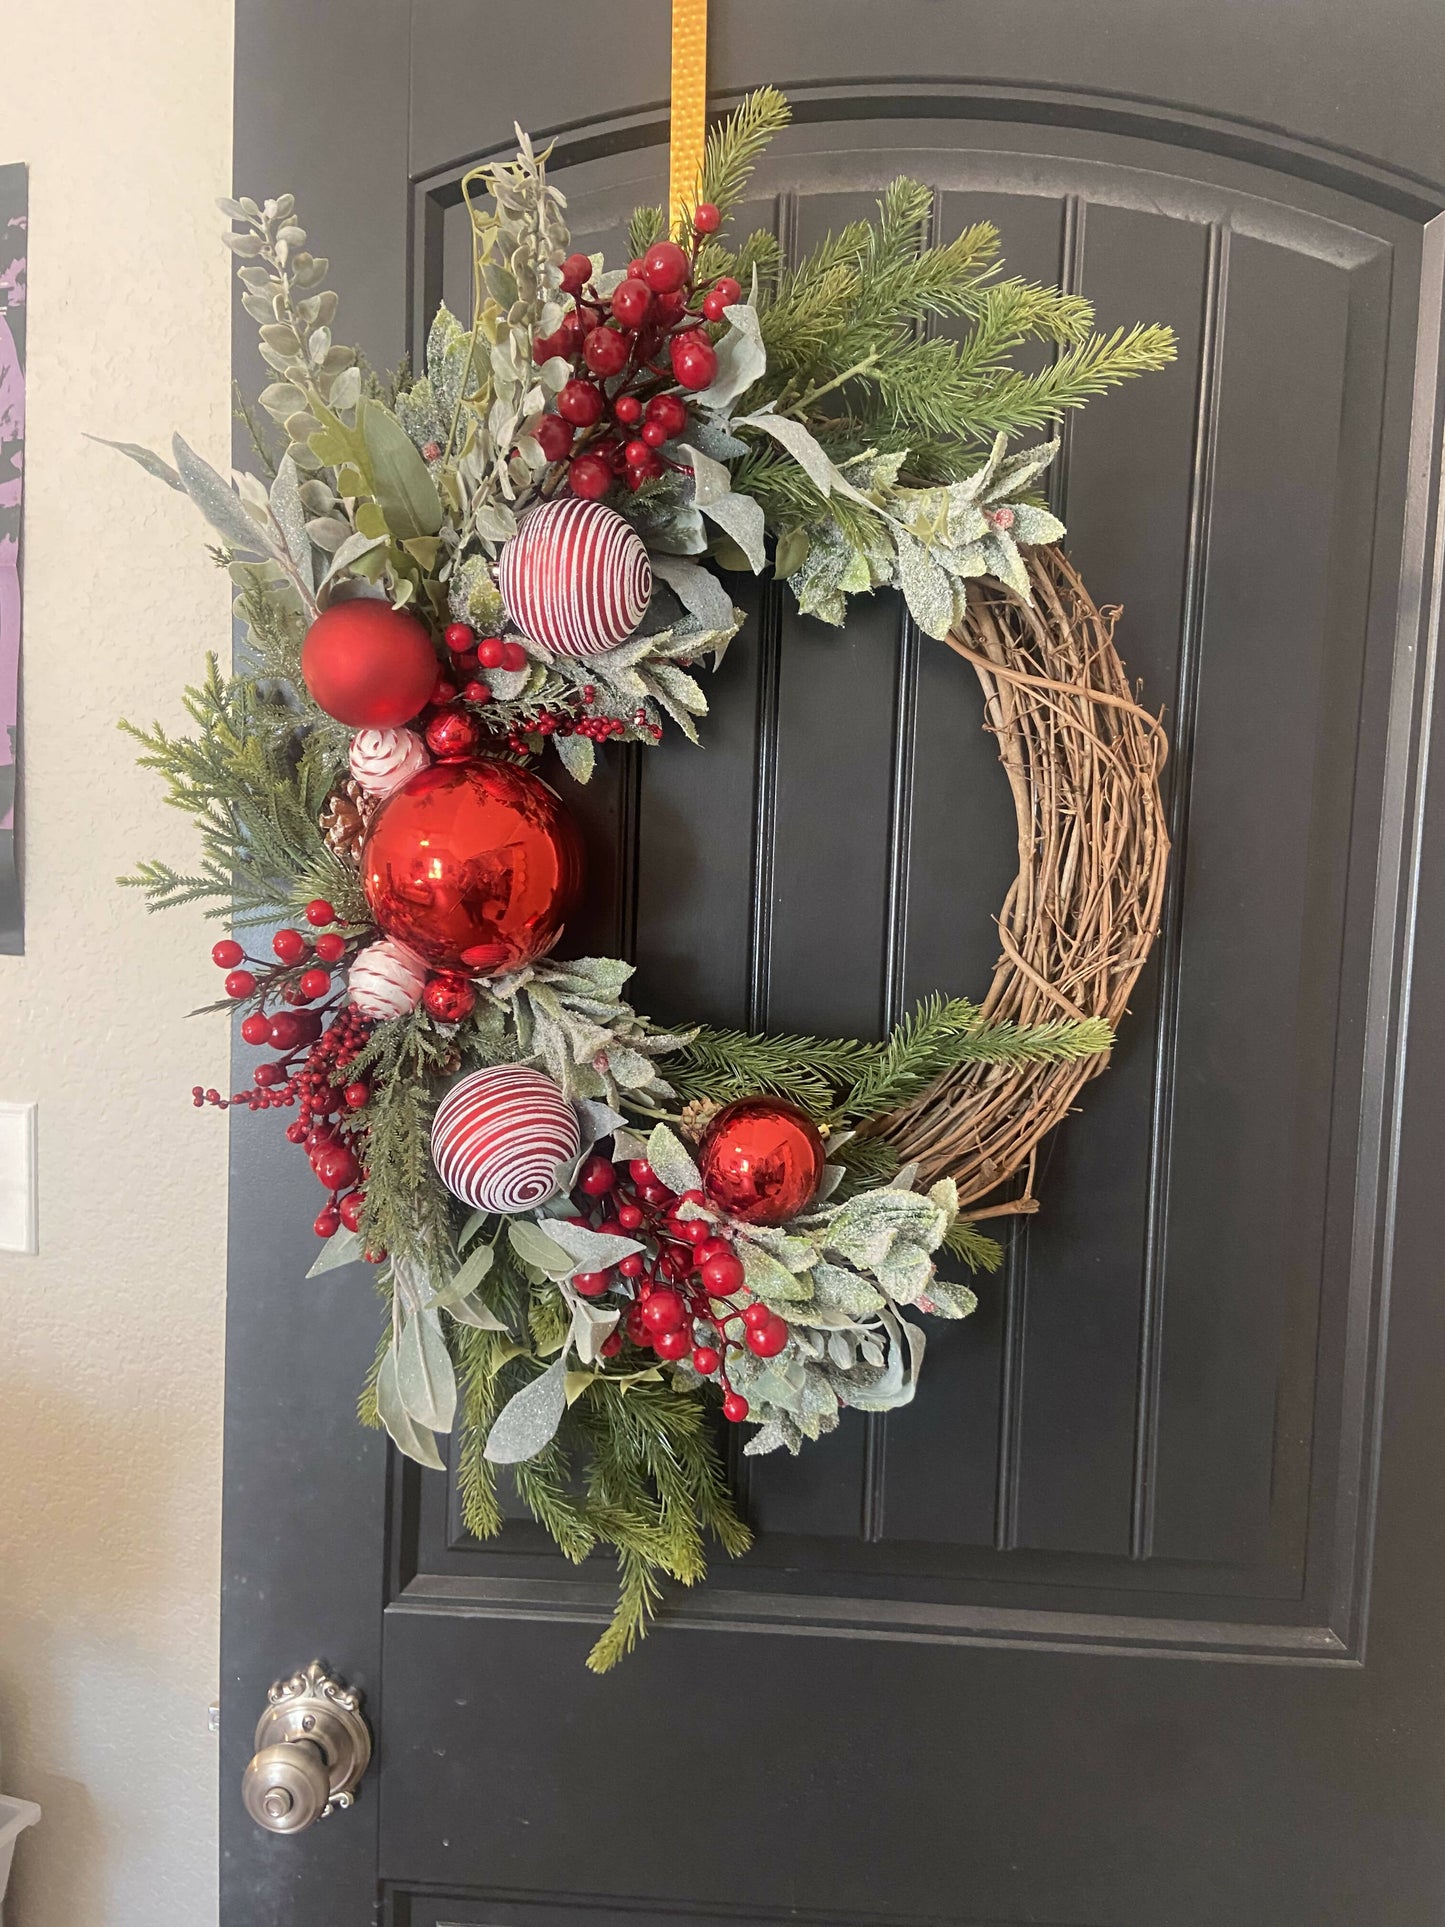 Red and white wreath